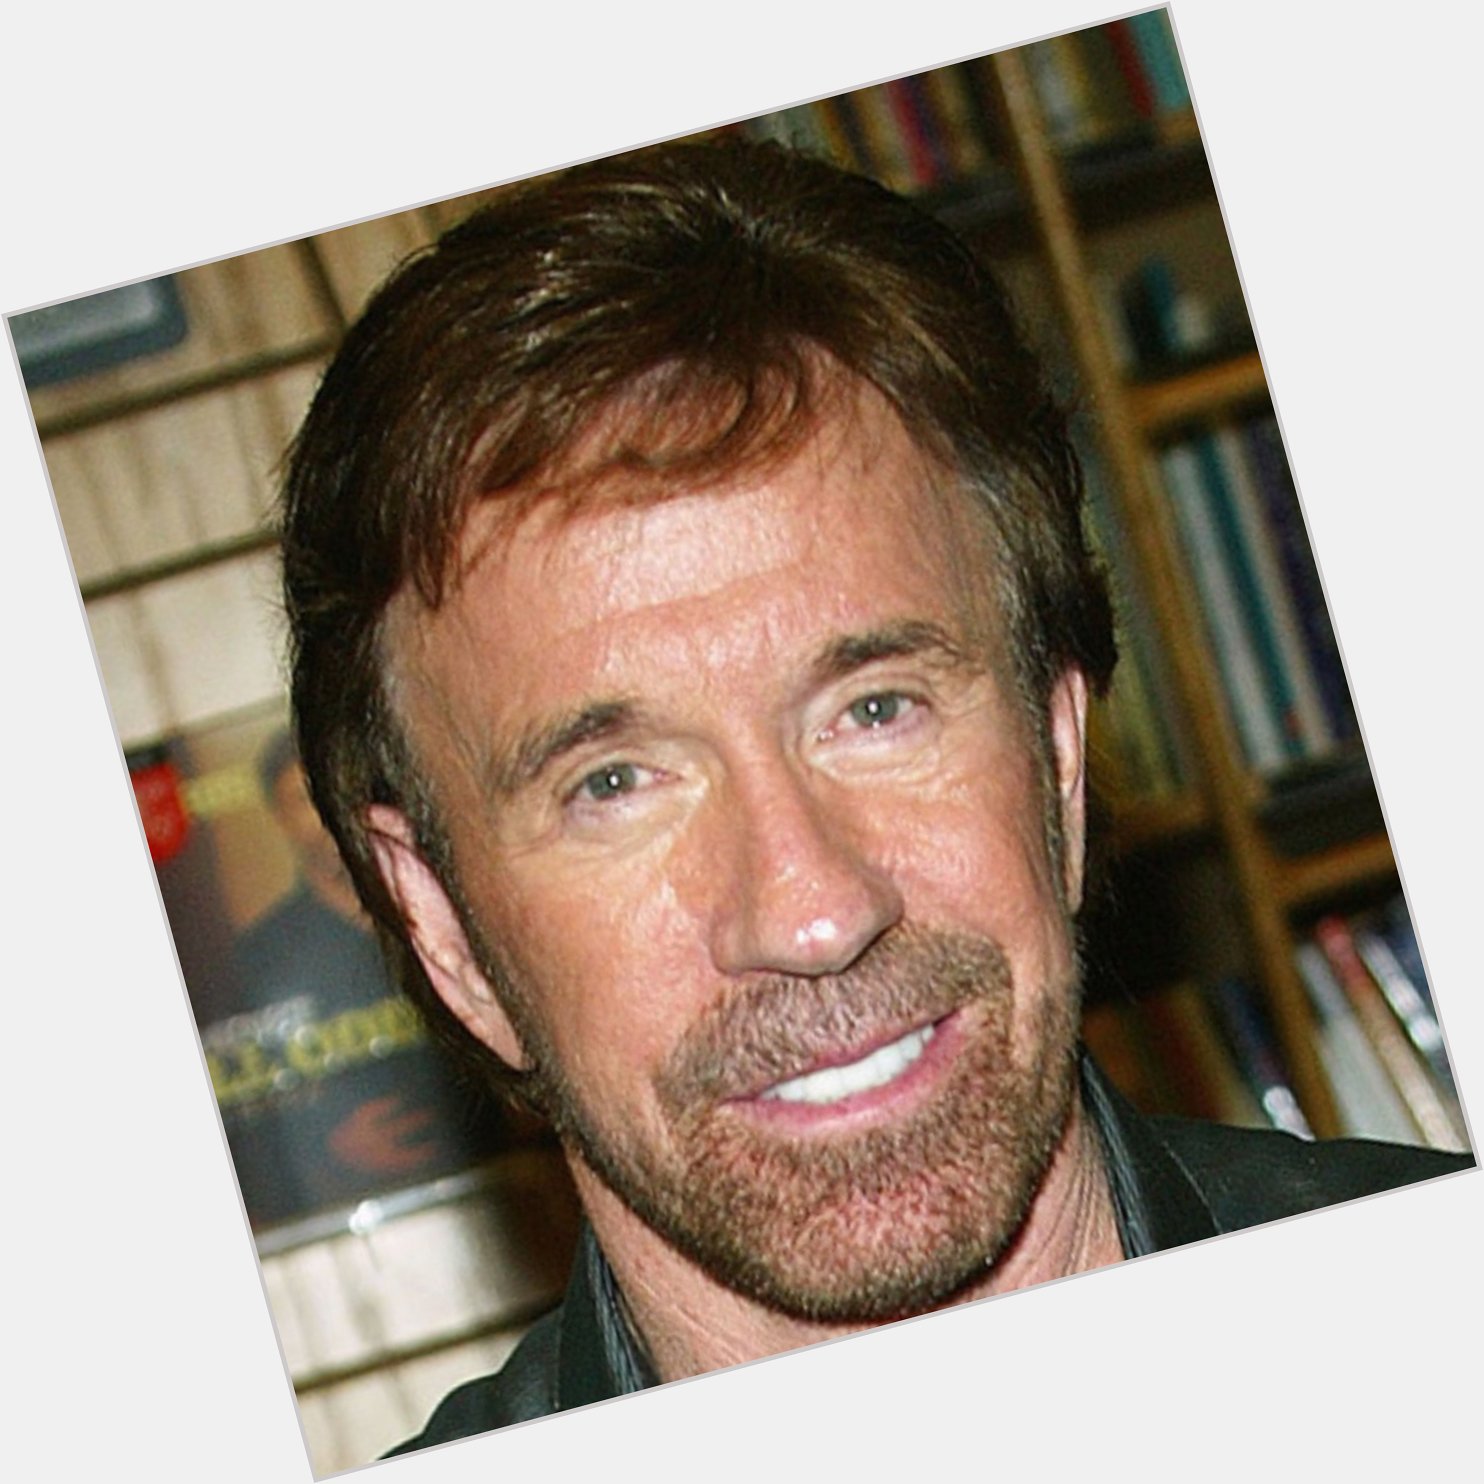 Happy birthday to martial artist, actor & producer, Chuck Norris! 